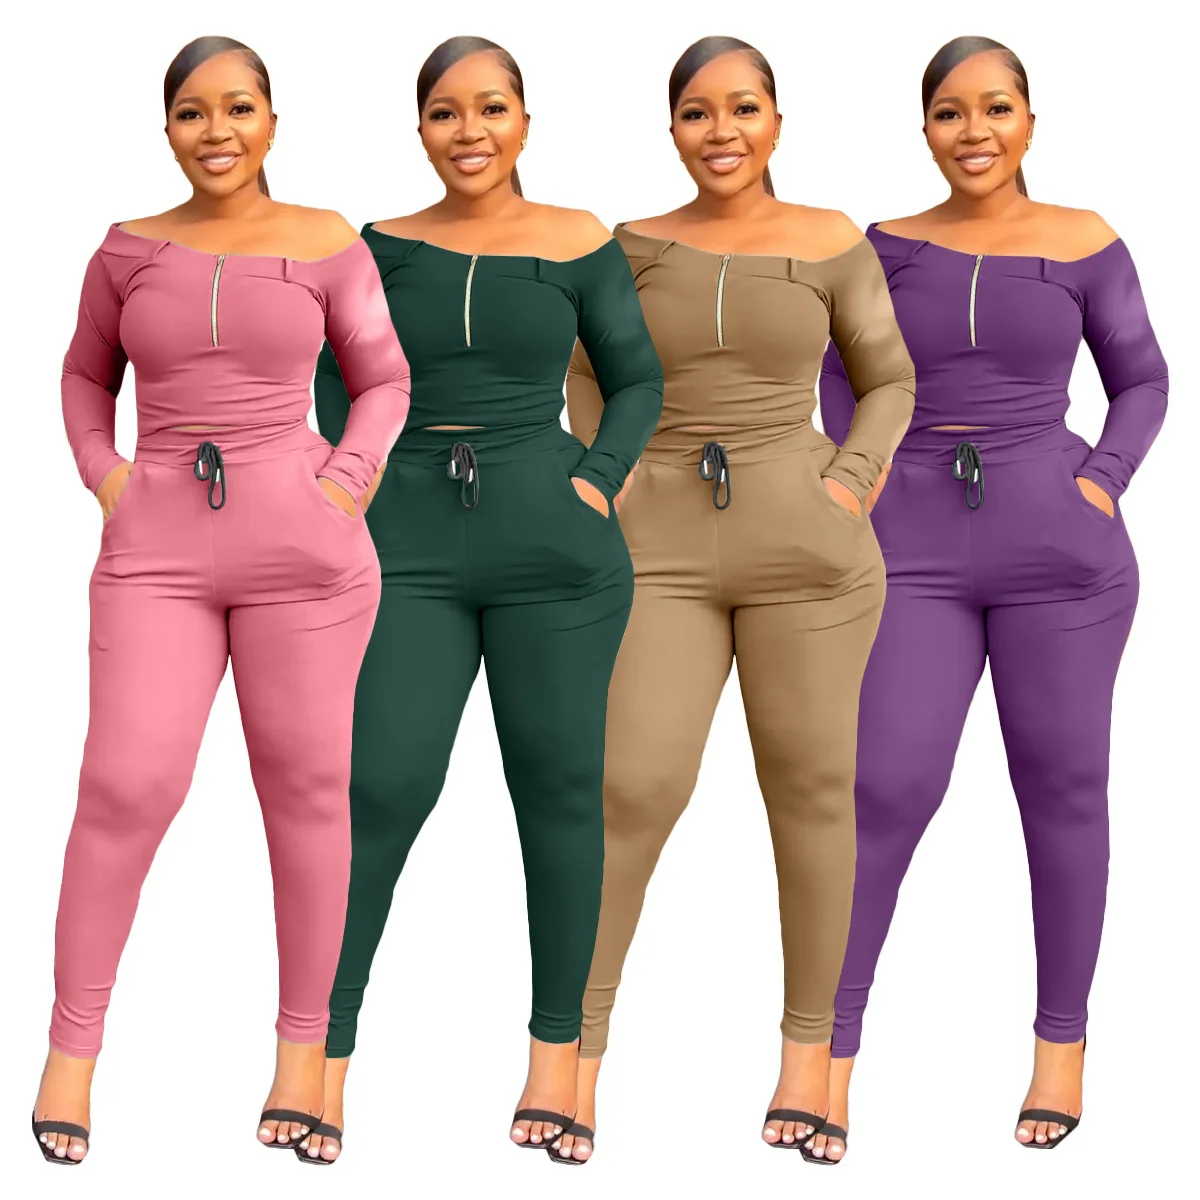 Women's Fall Solid Color Zip-Up Long Sleeve Pants Casual Sports Suit Long Sleeve Crop Top Leggings Fitness Set